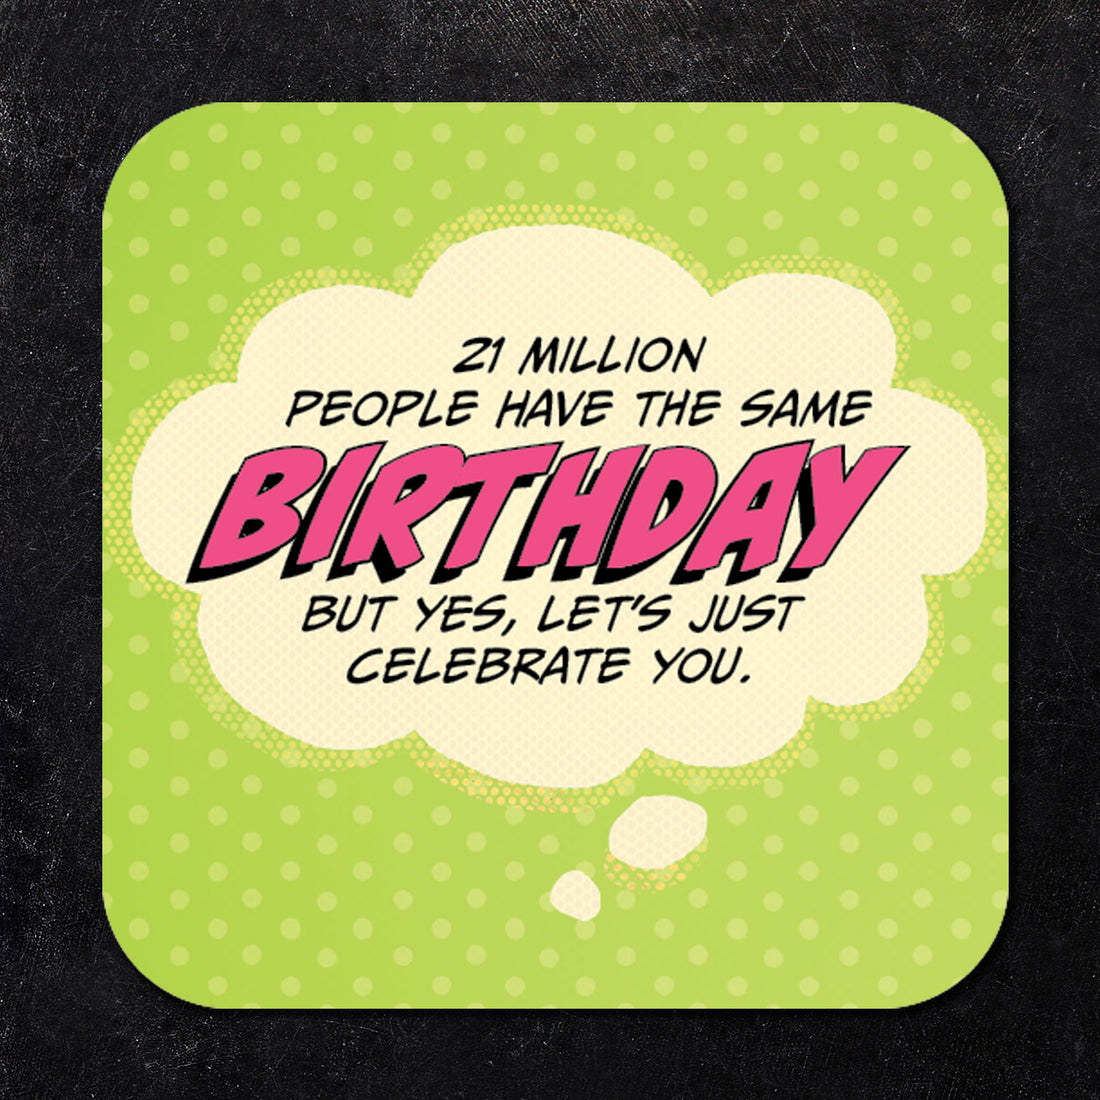 Coaster: Pop Life, 21 Million People Have the Same Birthday - Pack of 6